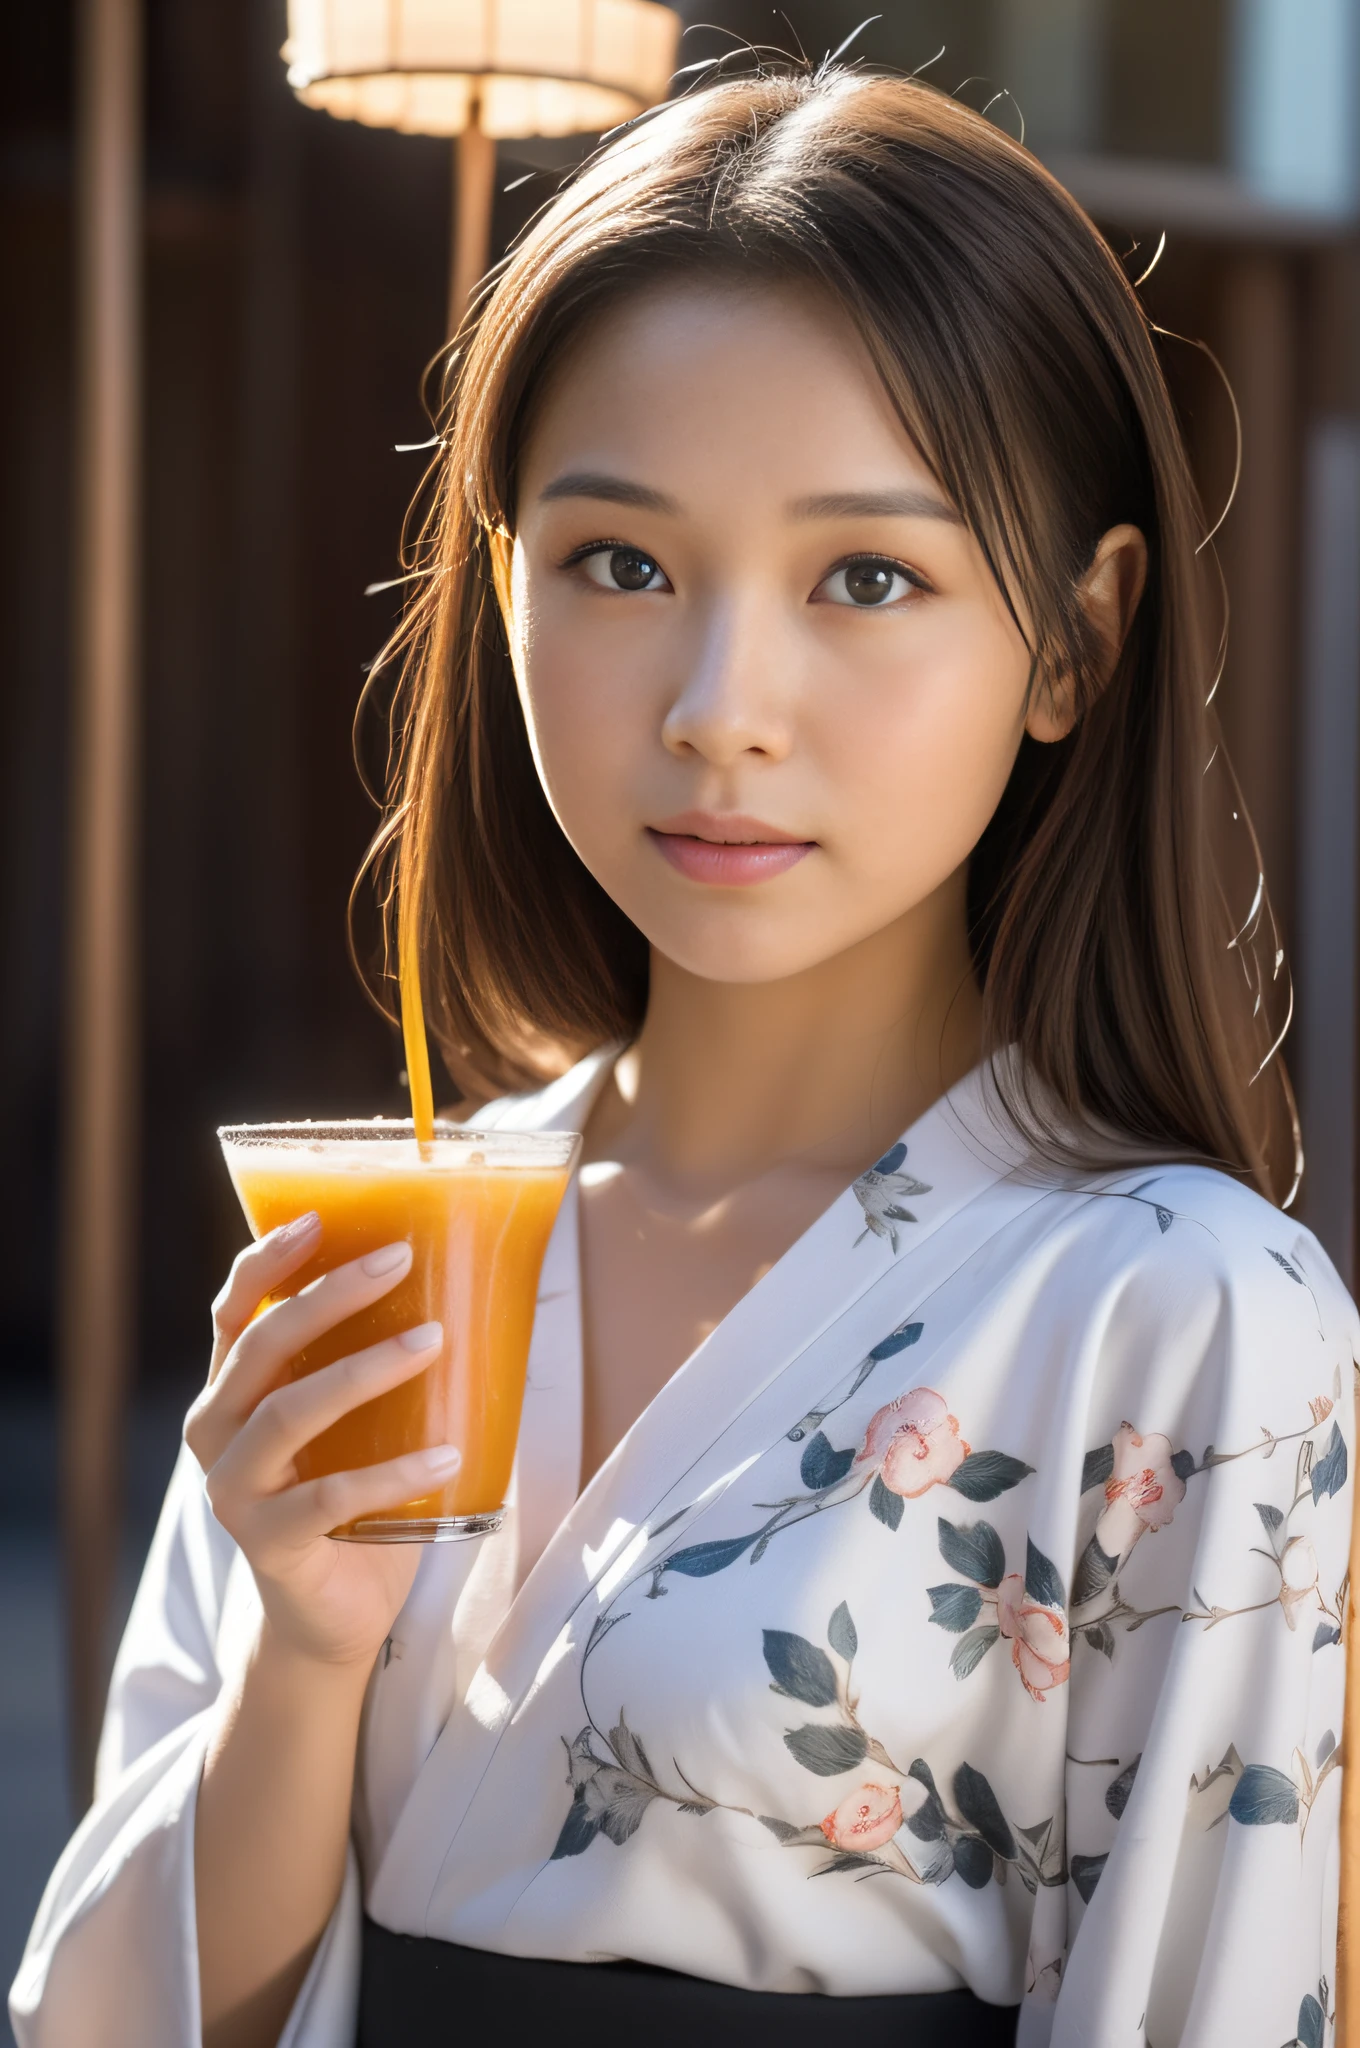 ((beste-Qualit))、((The ultra -The high-definition))finely detail、(((Beautiful One Girl)))、very detailed eyes and faces、Yukata with a light floral pattern、In the street、Drink juice